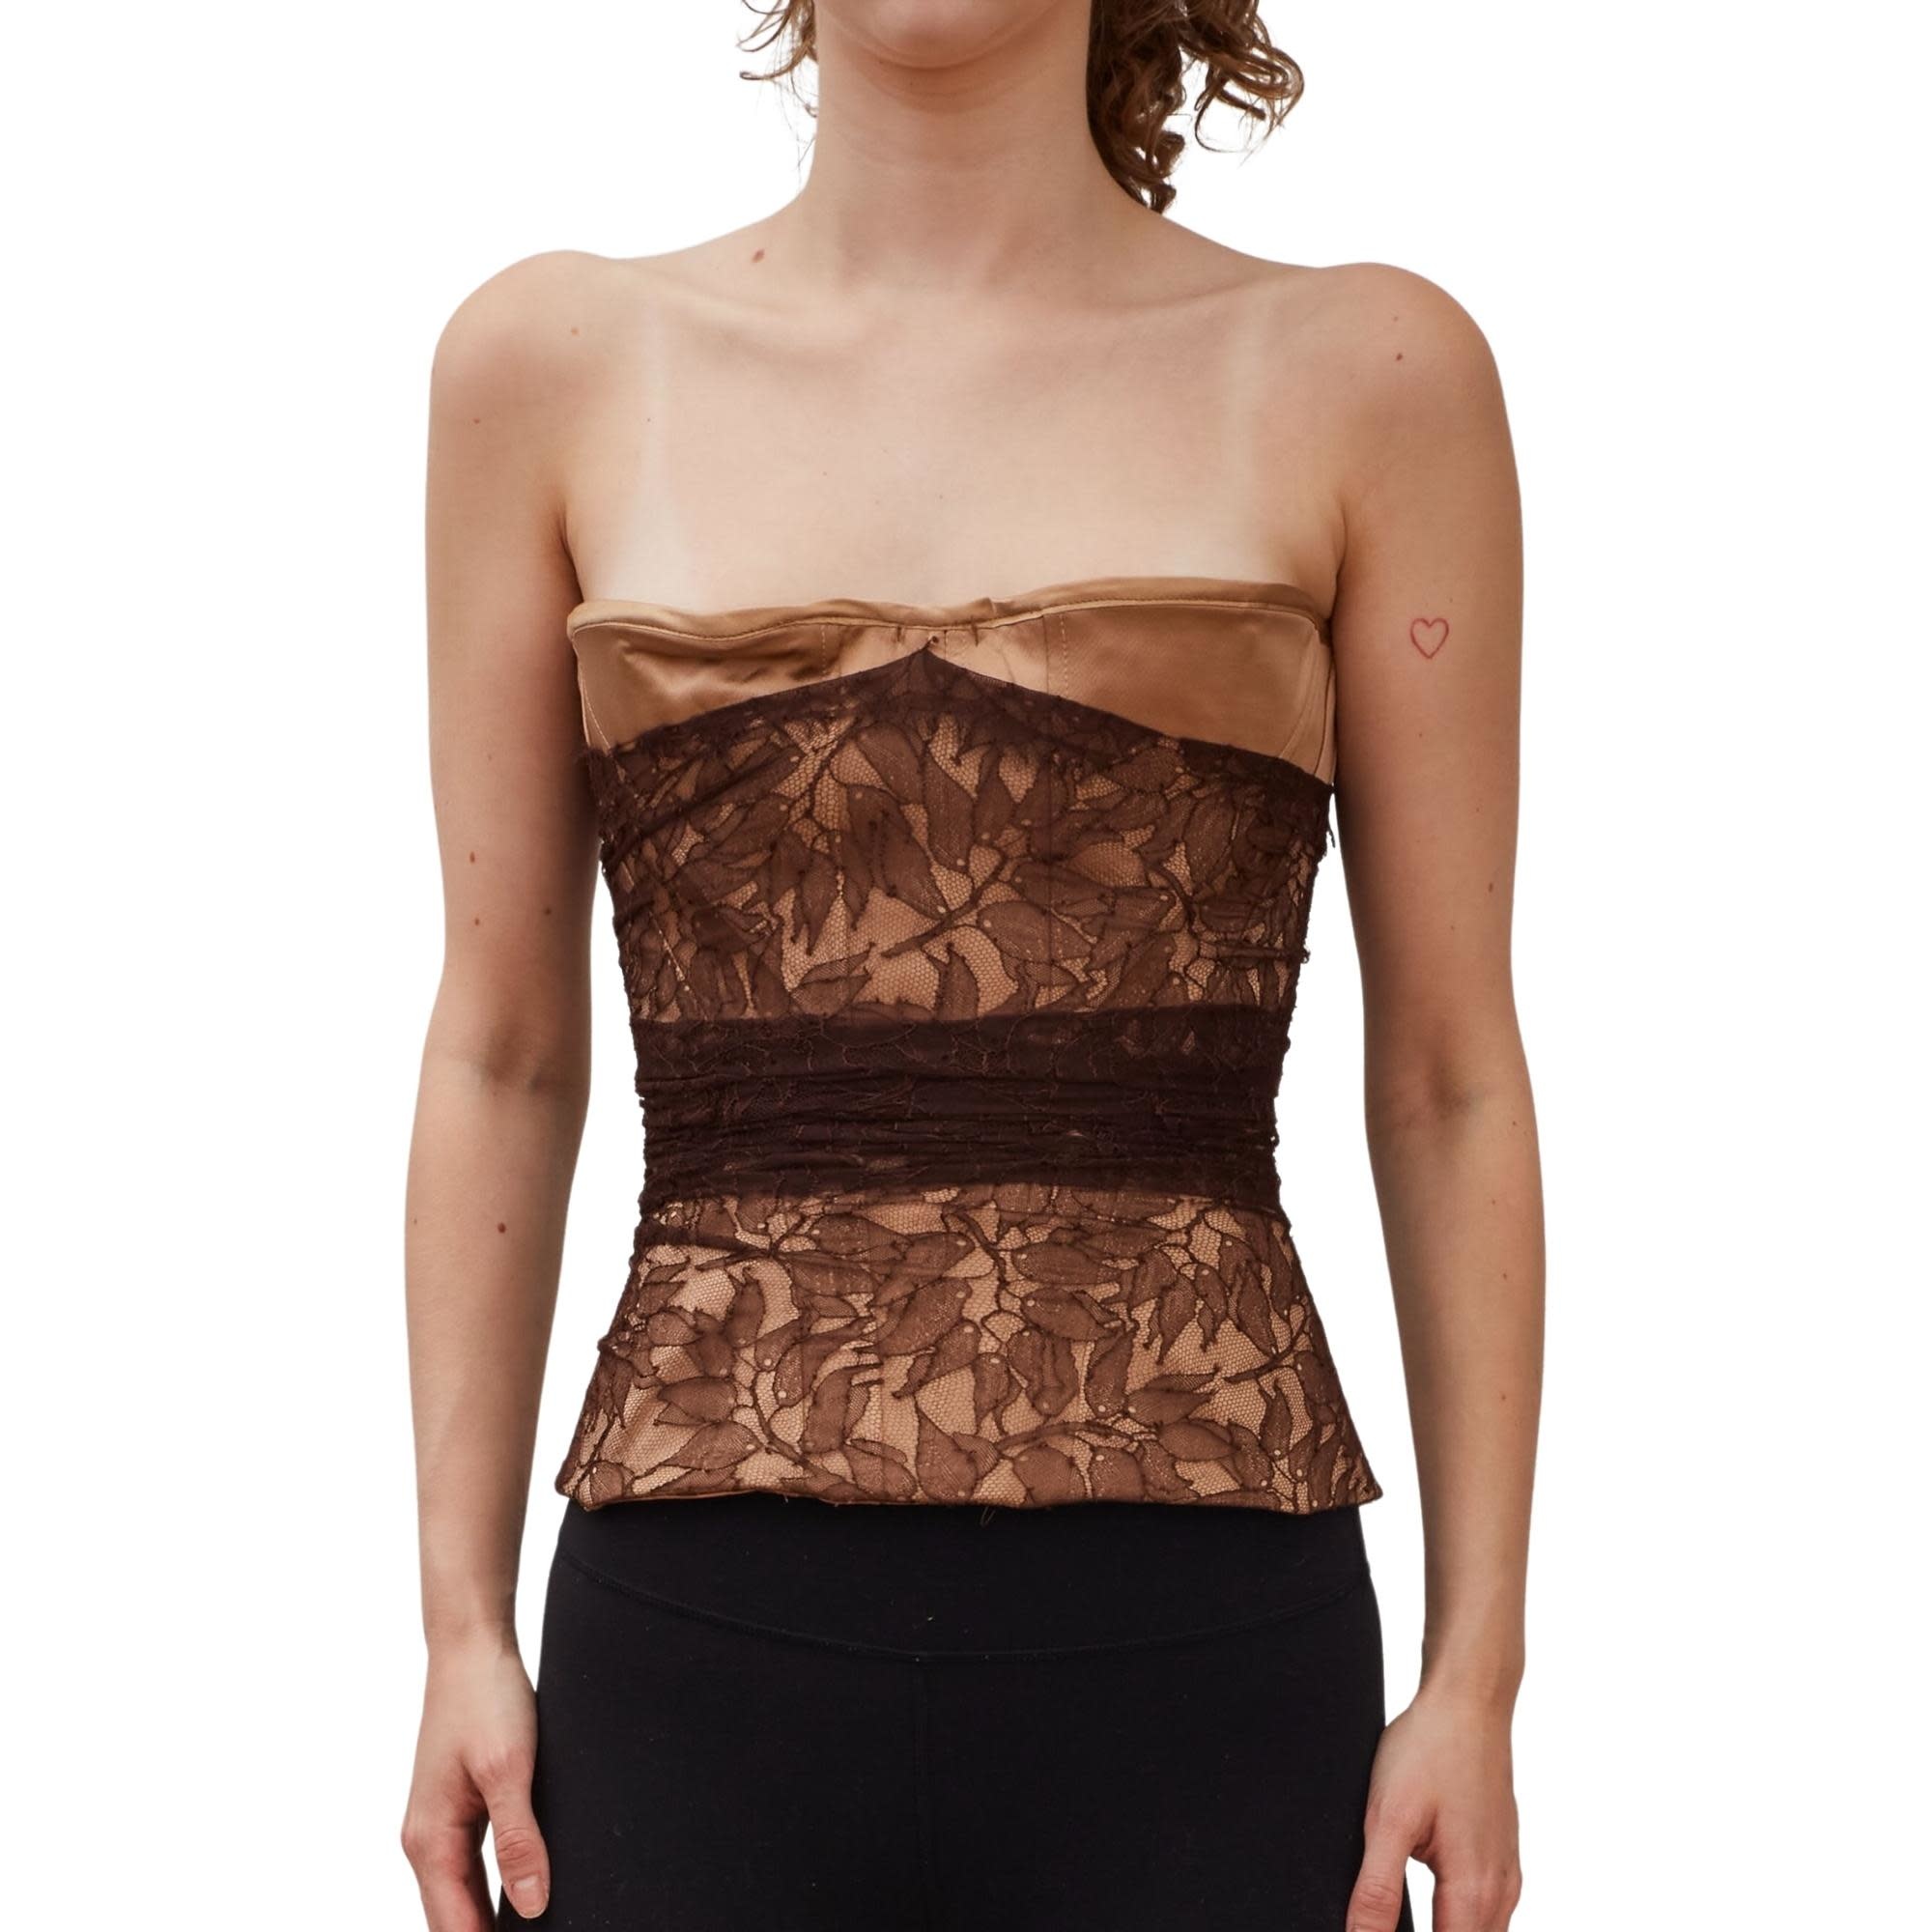 GUY LAROCHE LACE OVERLAY BROWN NUDE CORSET TOP (38FR / SMALL) - CRTBLNCHSHP